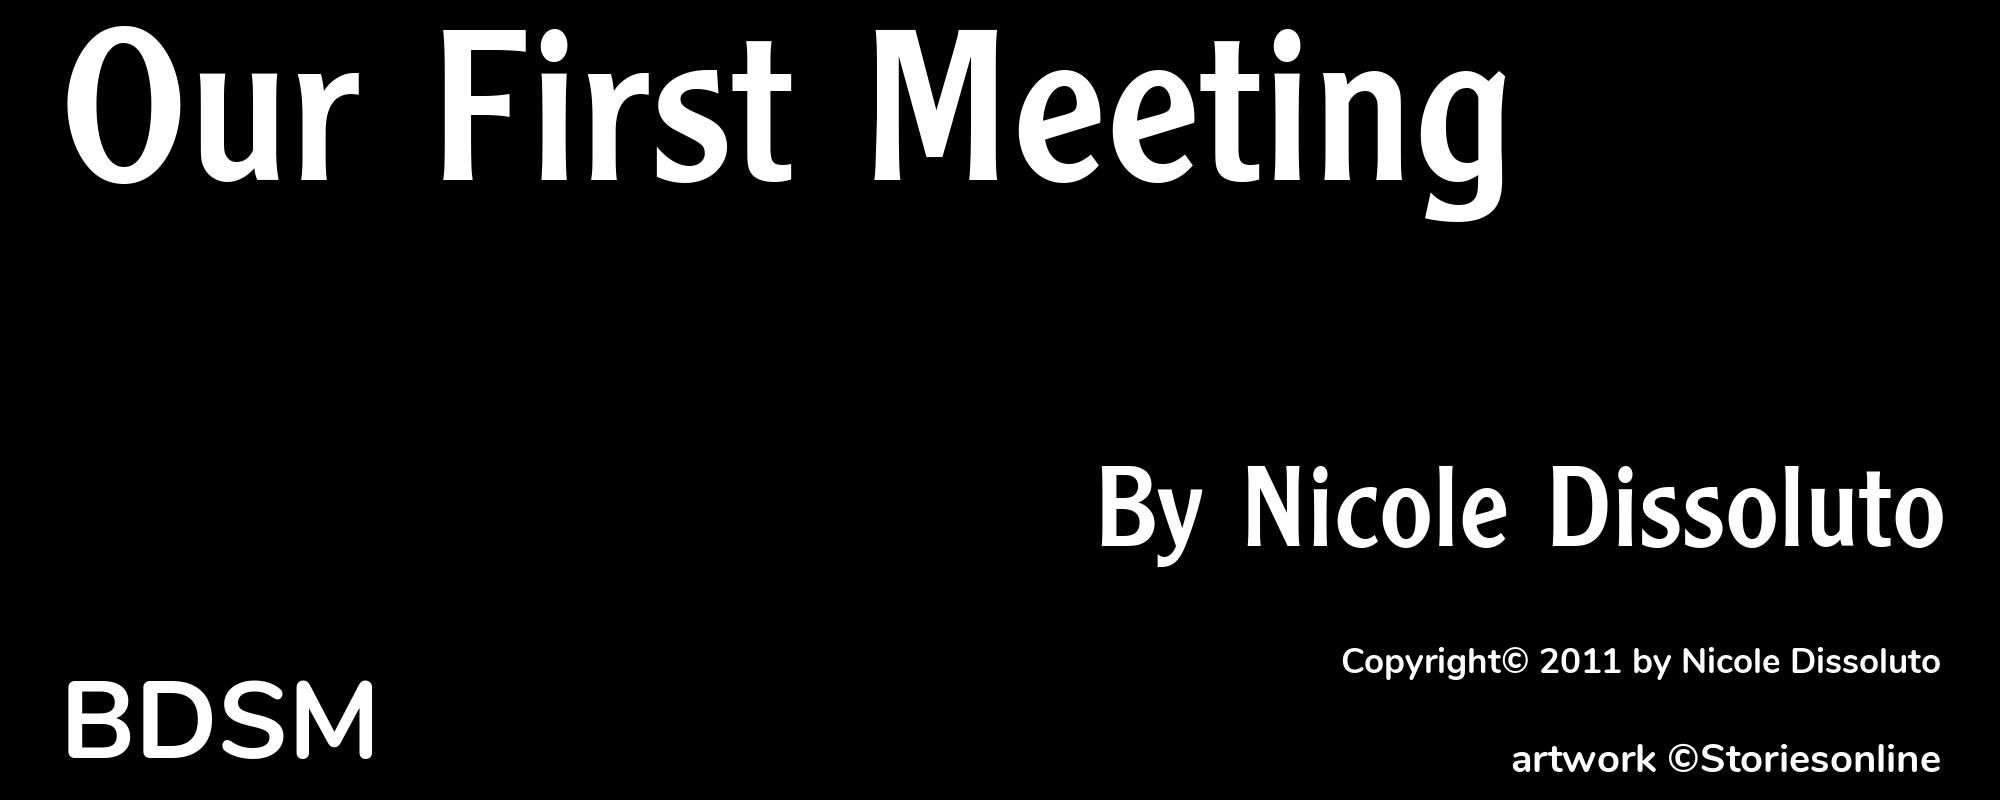 Our First Meeting - Cover